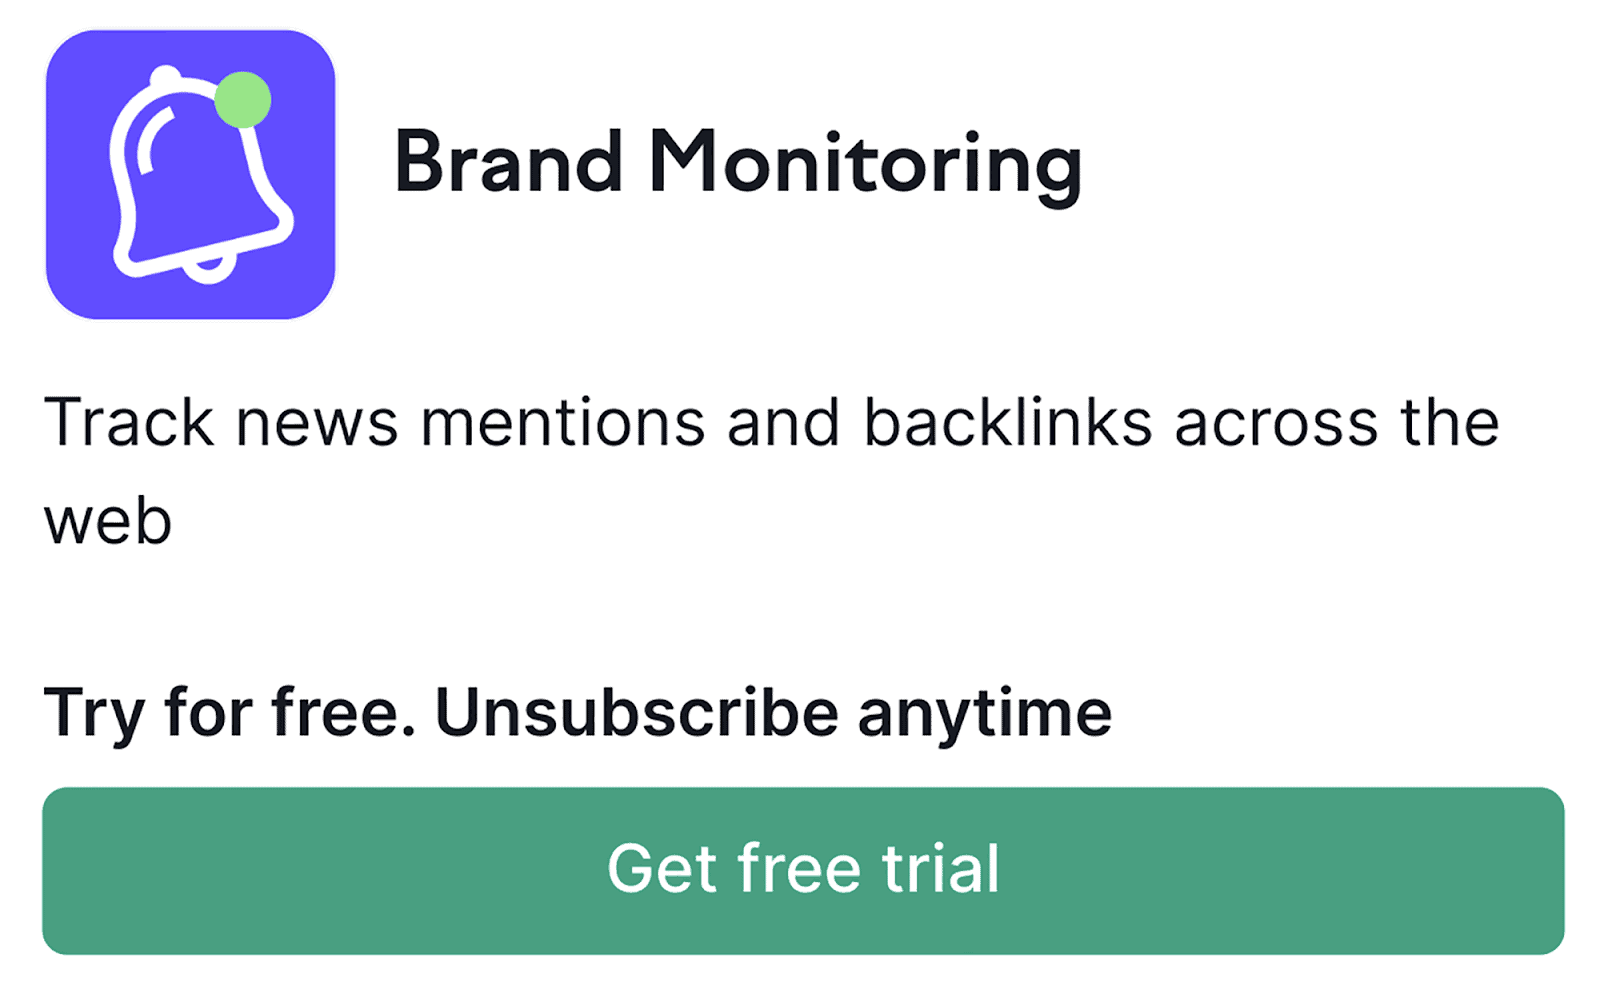 Monitor your brand mentions